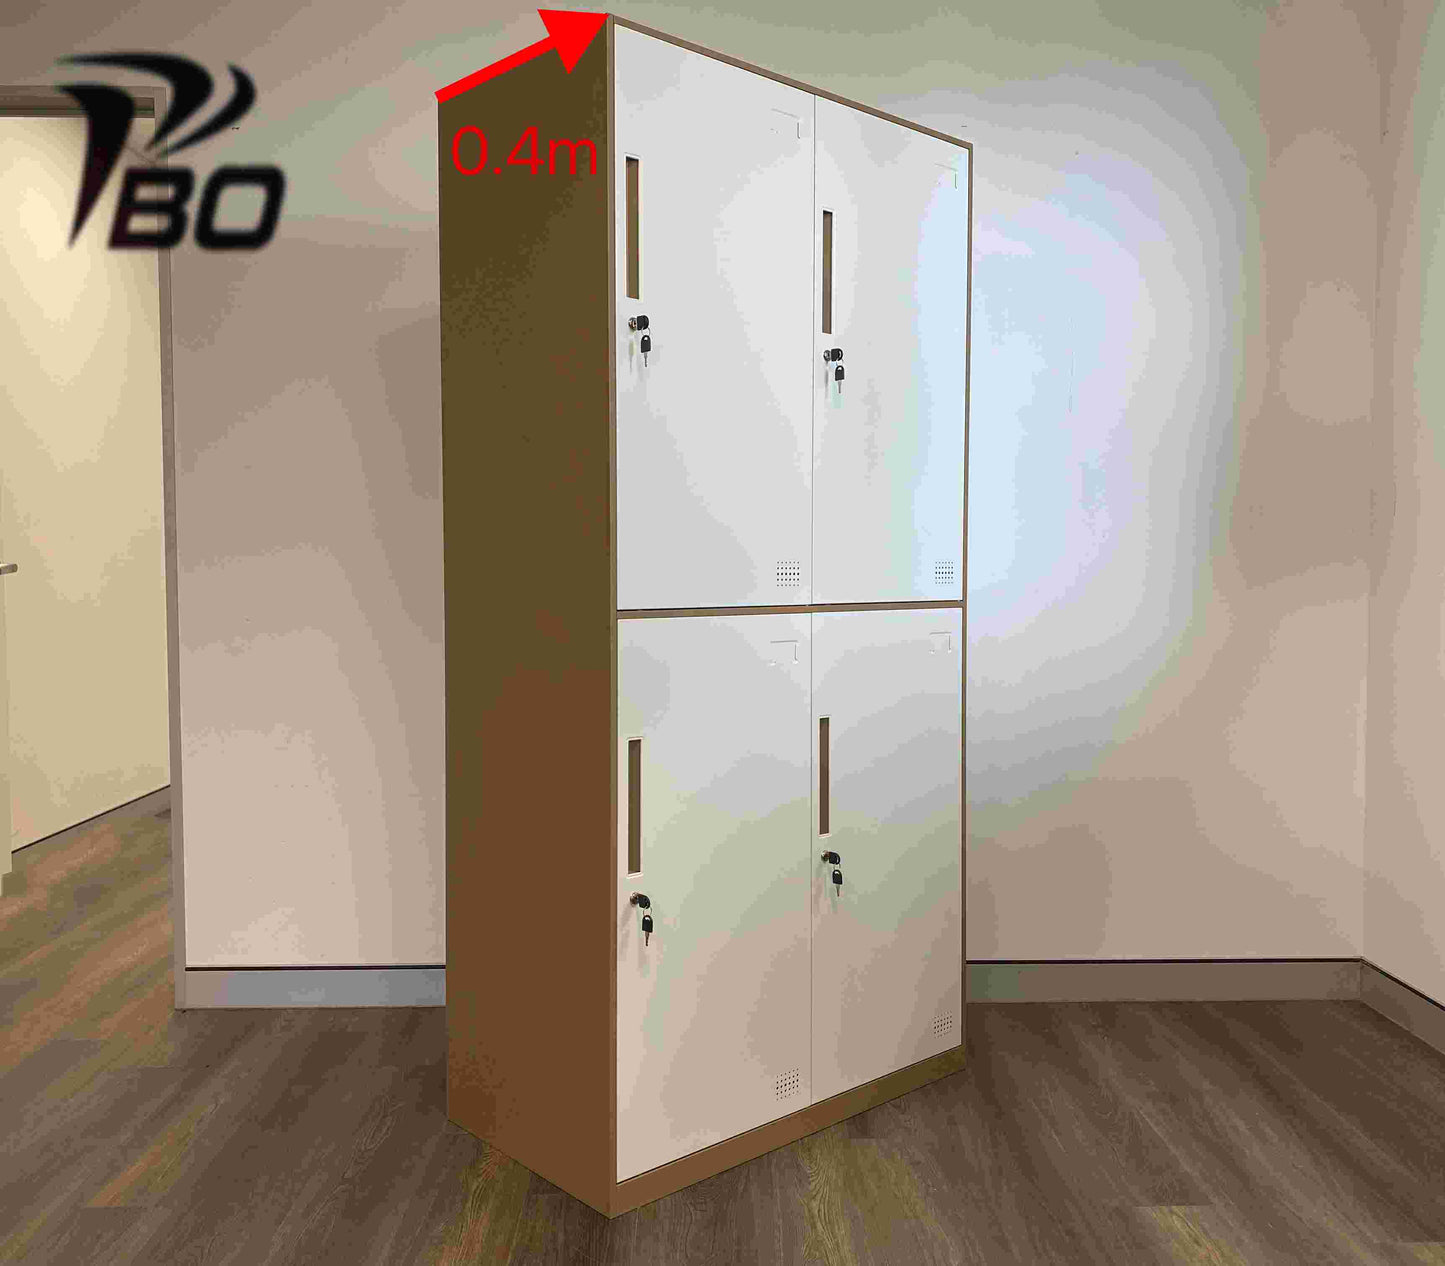 File Cabinet with Four Doors Coffee & White 1.85m(H)*0.9m(L)*0.4m(D)